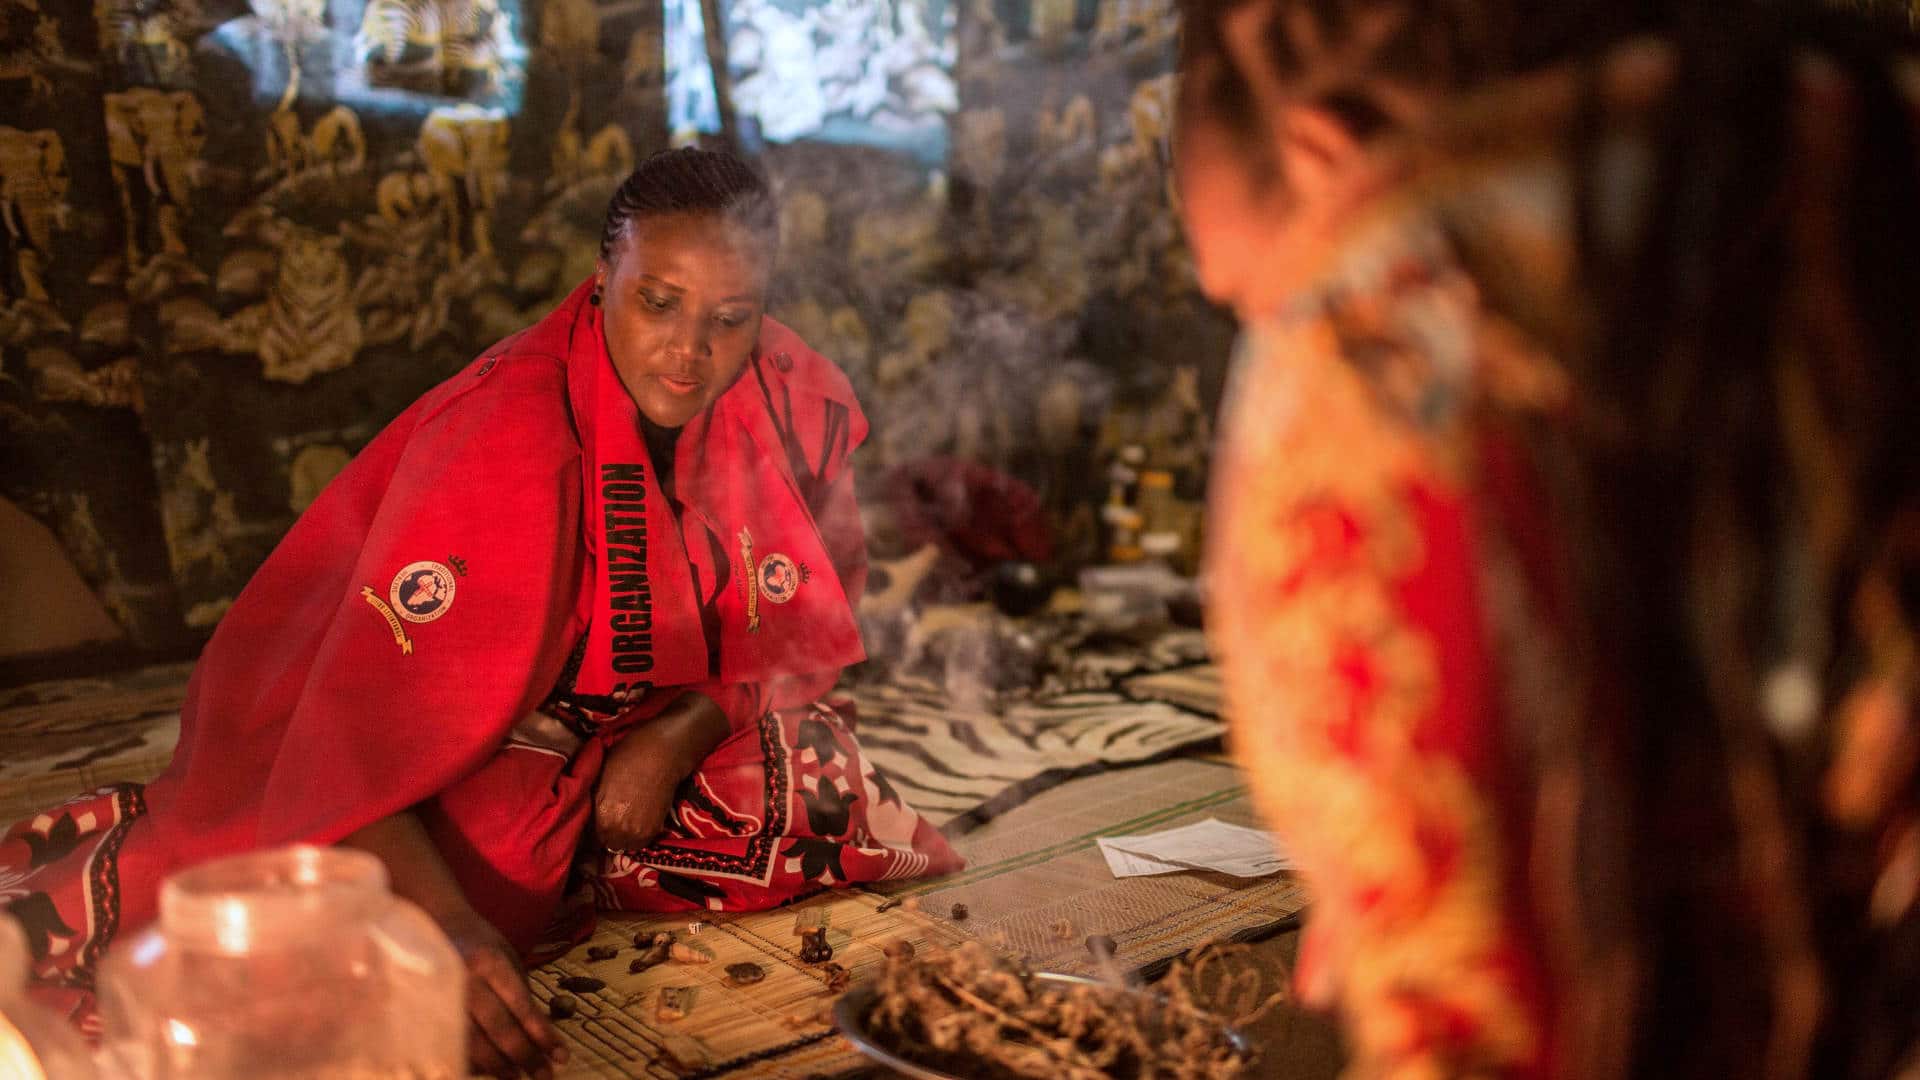 Traditional healer and national coordinator of the Traditional Healers Organisation (THO) of South Africa, Phephisile Maseko, treats patients with a mix of cannabis and other herbs.